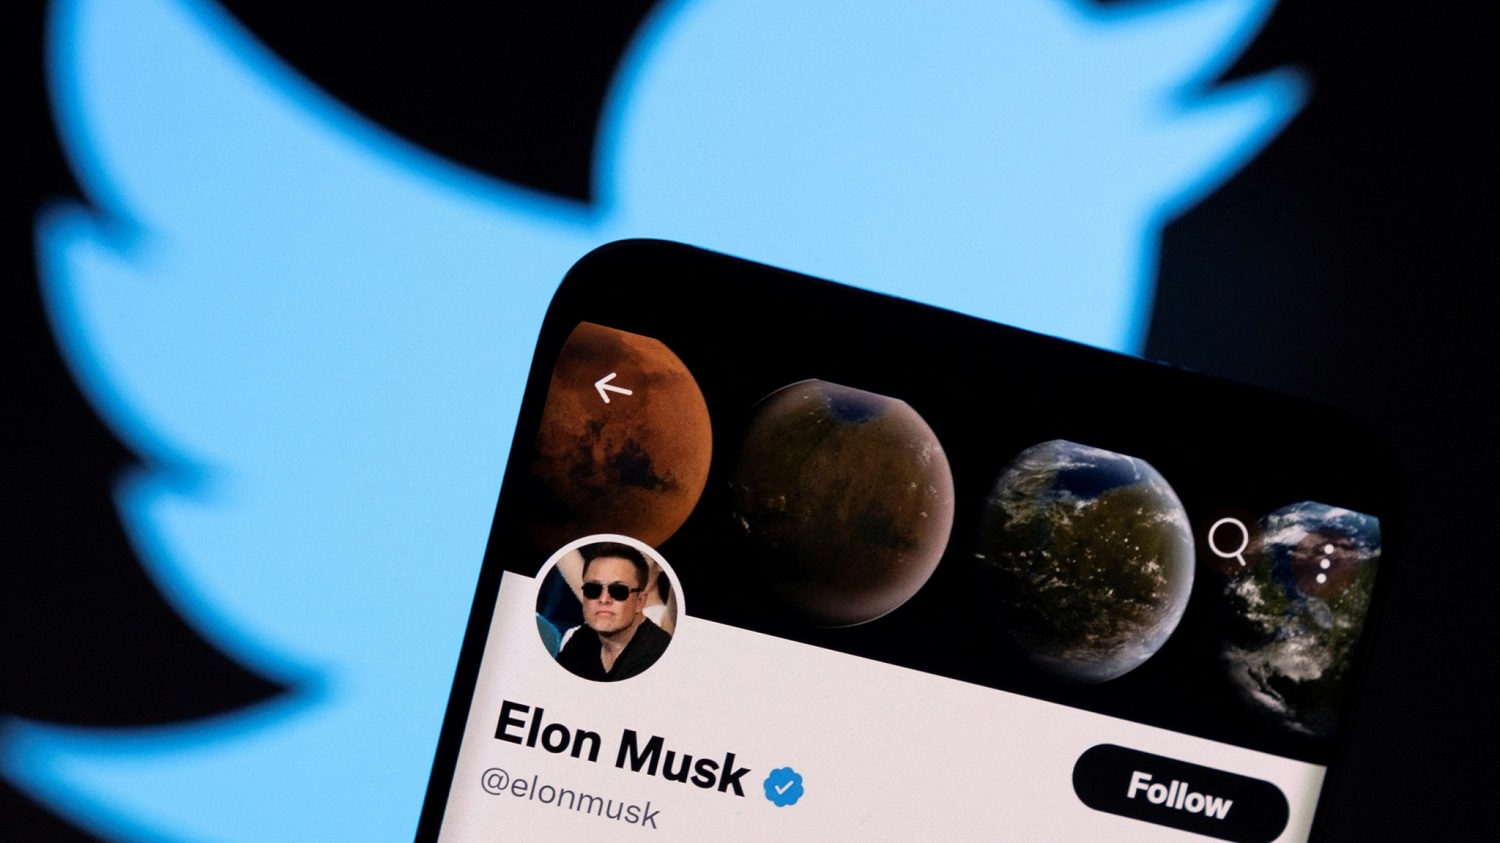 Elon Musk, the new owner of Twitter | AbuzWeb - #1 Web Services Agency, based in Benin, Africa and Colorado, USA